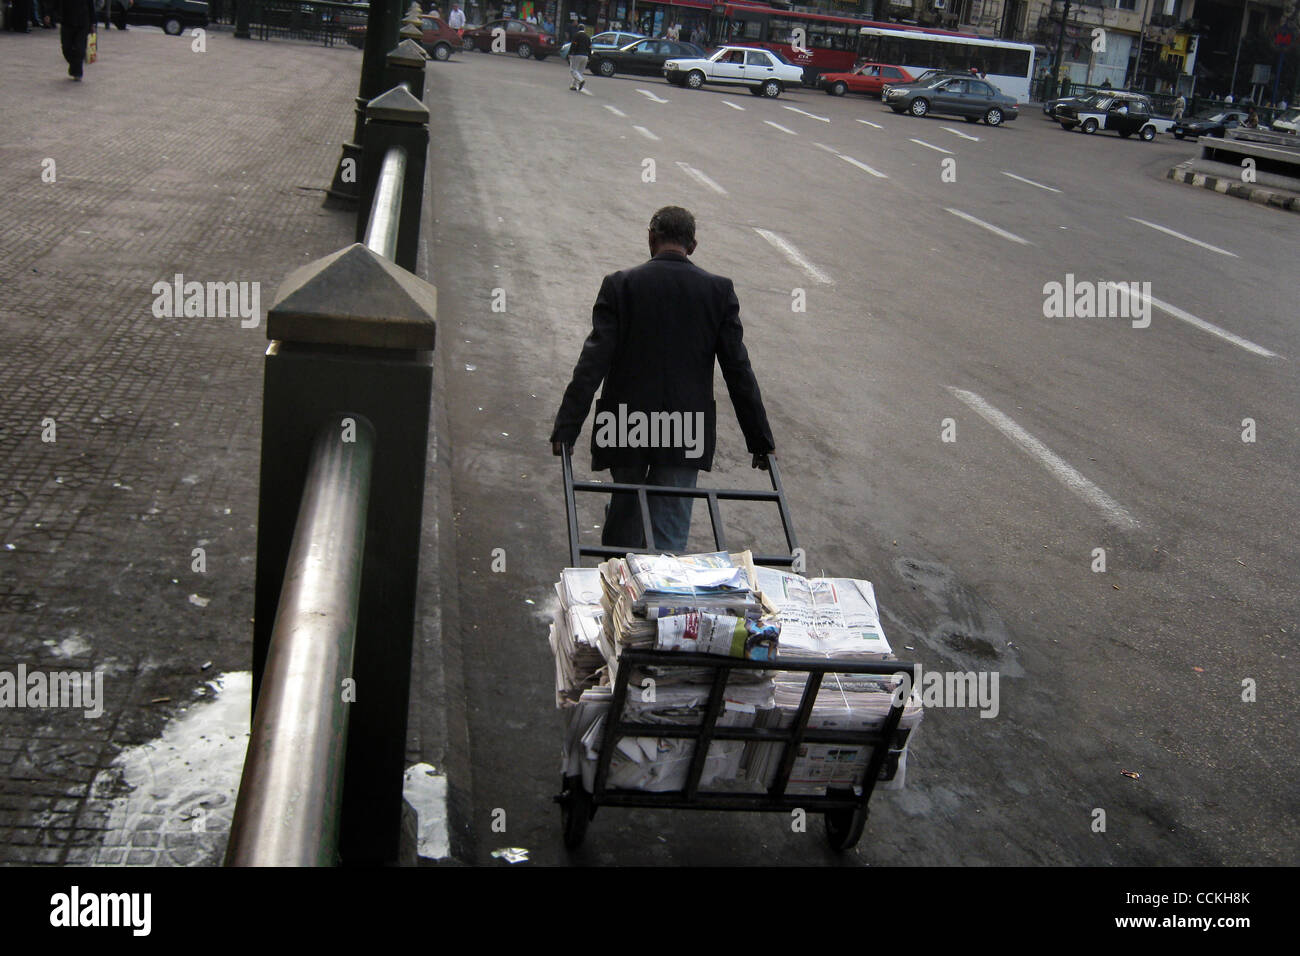 Nov. 28, 2010 - Cairo, Egypt - 20101128 - Cairo, Egypt - ..Early election morning a man wheels out the days newspapers to be sold in Midan Tahrir in central Cairo...The Egyptian parliamentary election kicked off Sunday morning as voters went to polls nationwide to select a new People's Assembly.  Th Stock Photo